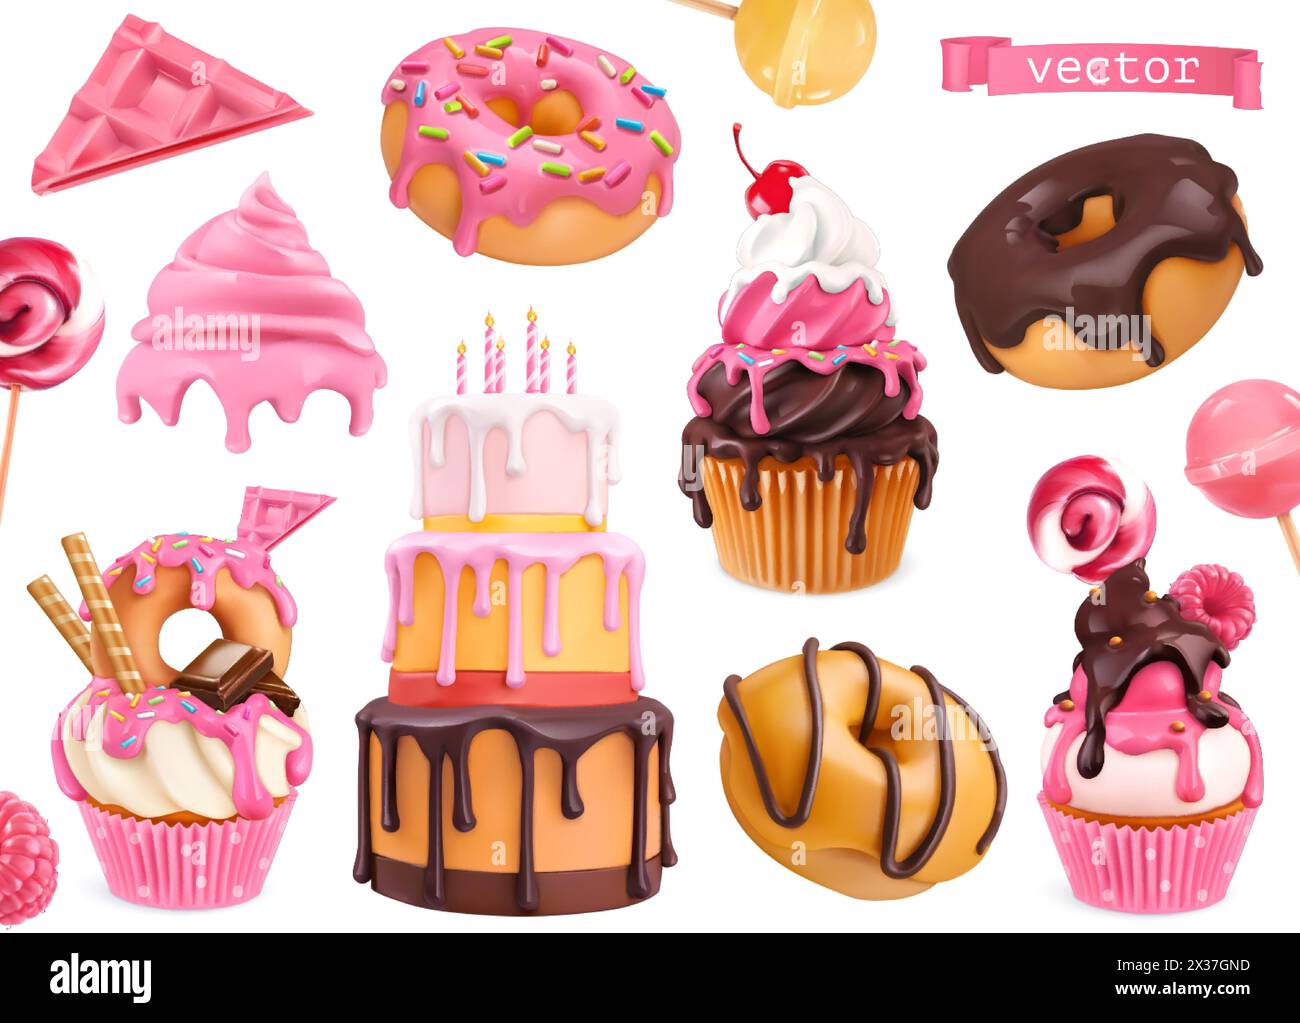 Sweets 3d vector realistic objects. Cupcakes, cake, donuts, candy. Food icons Stock Vector